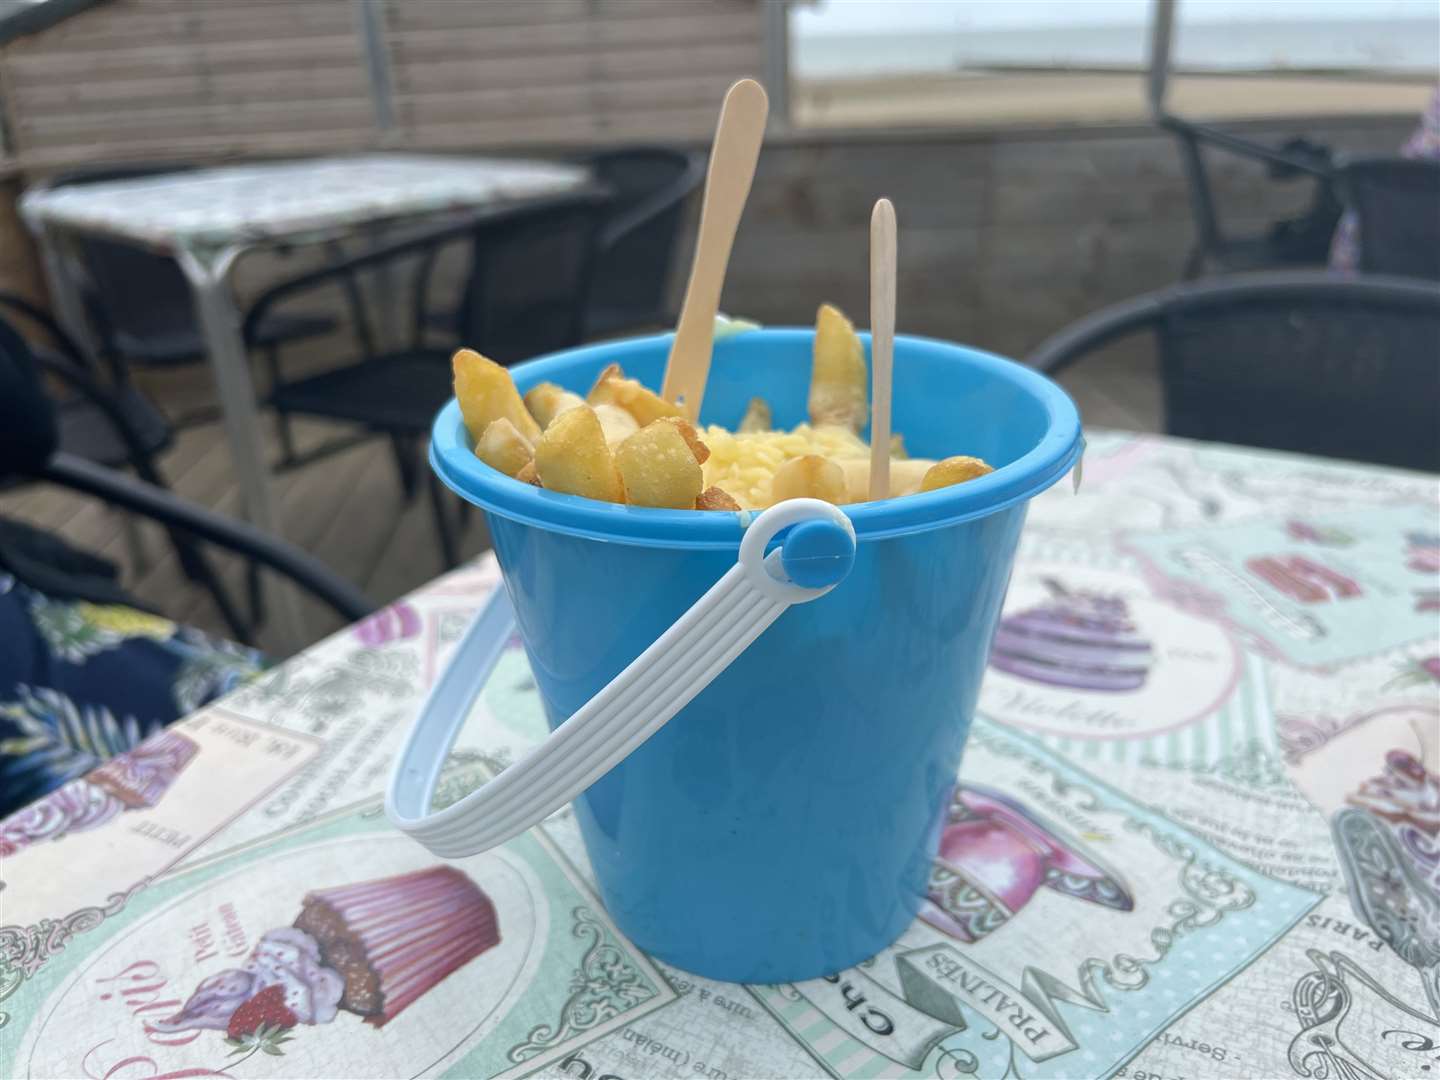 I'd never eaten out of a plastic bucket before - but you get to keep it and with a sandy beach within yards, who could resist going straight out to make a sandcastle?